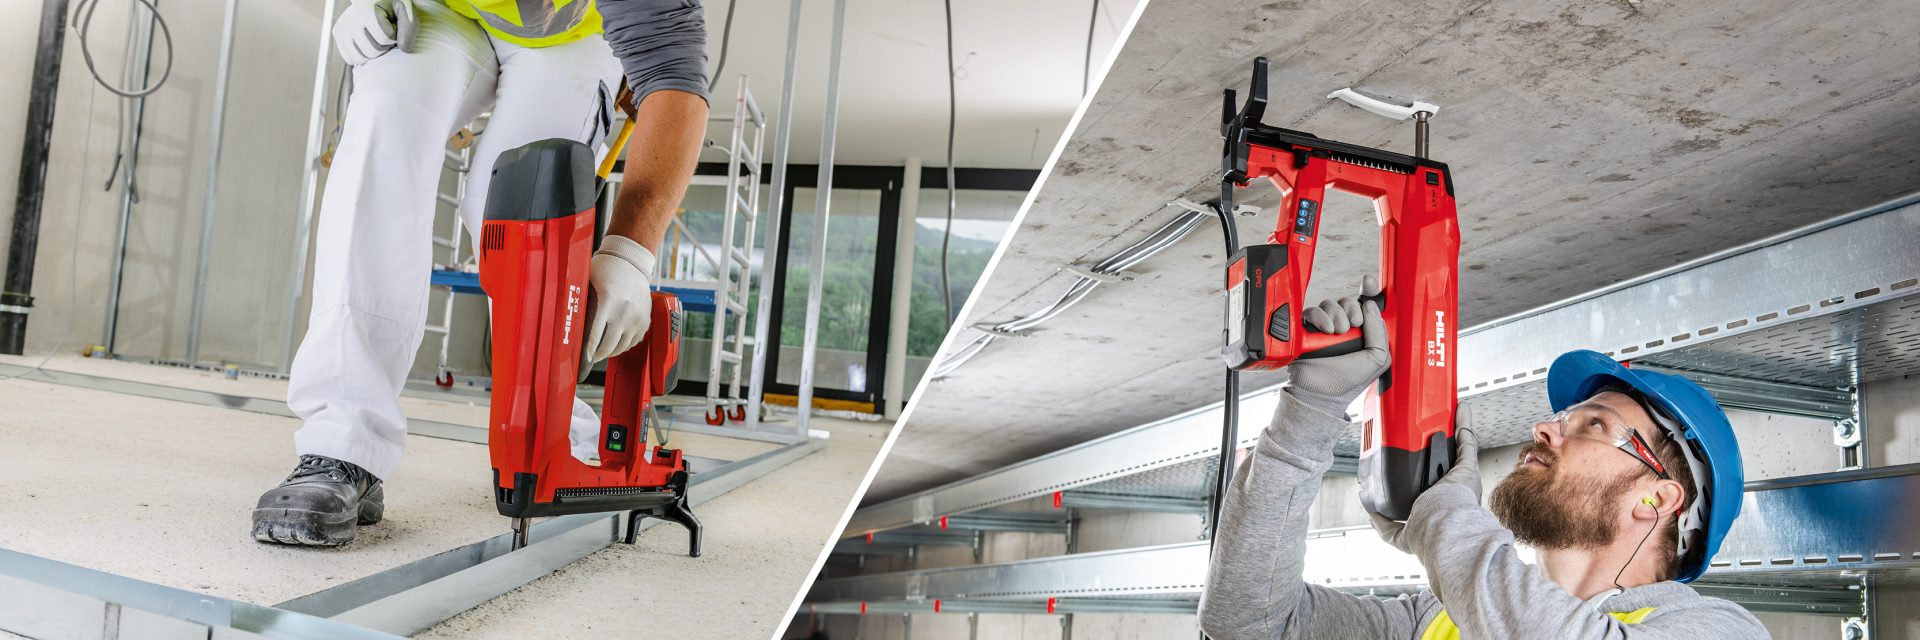 Make the switch to the battery-powered BX 3, the cordless nailer designed to be cleaner, quieter and more hassle-free fastenings to concrete than any other nailer